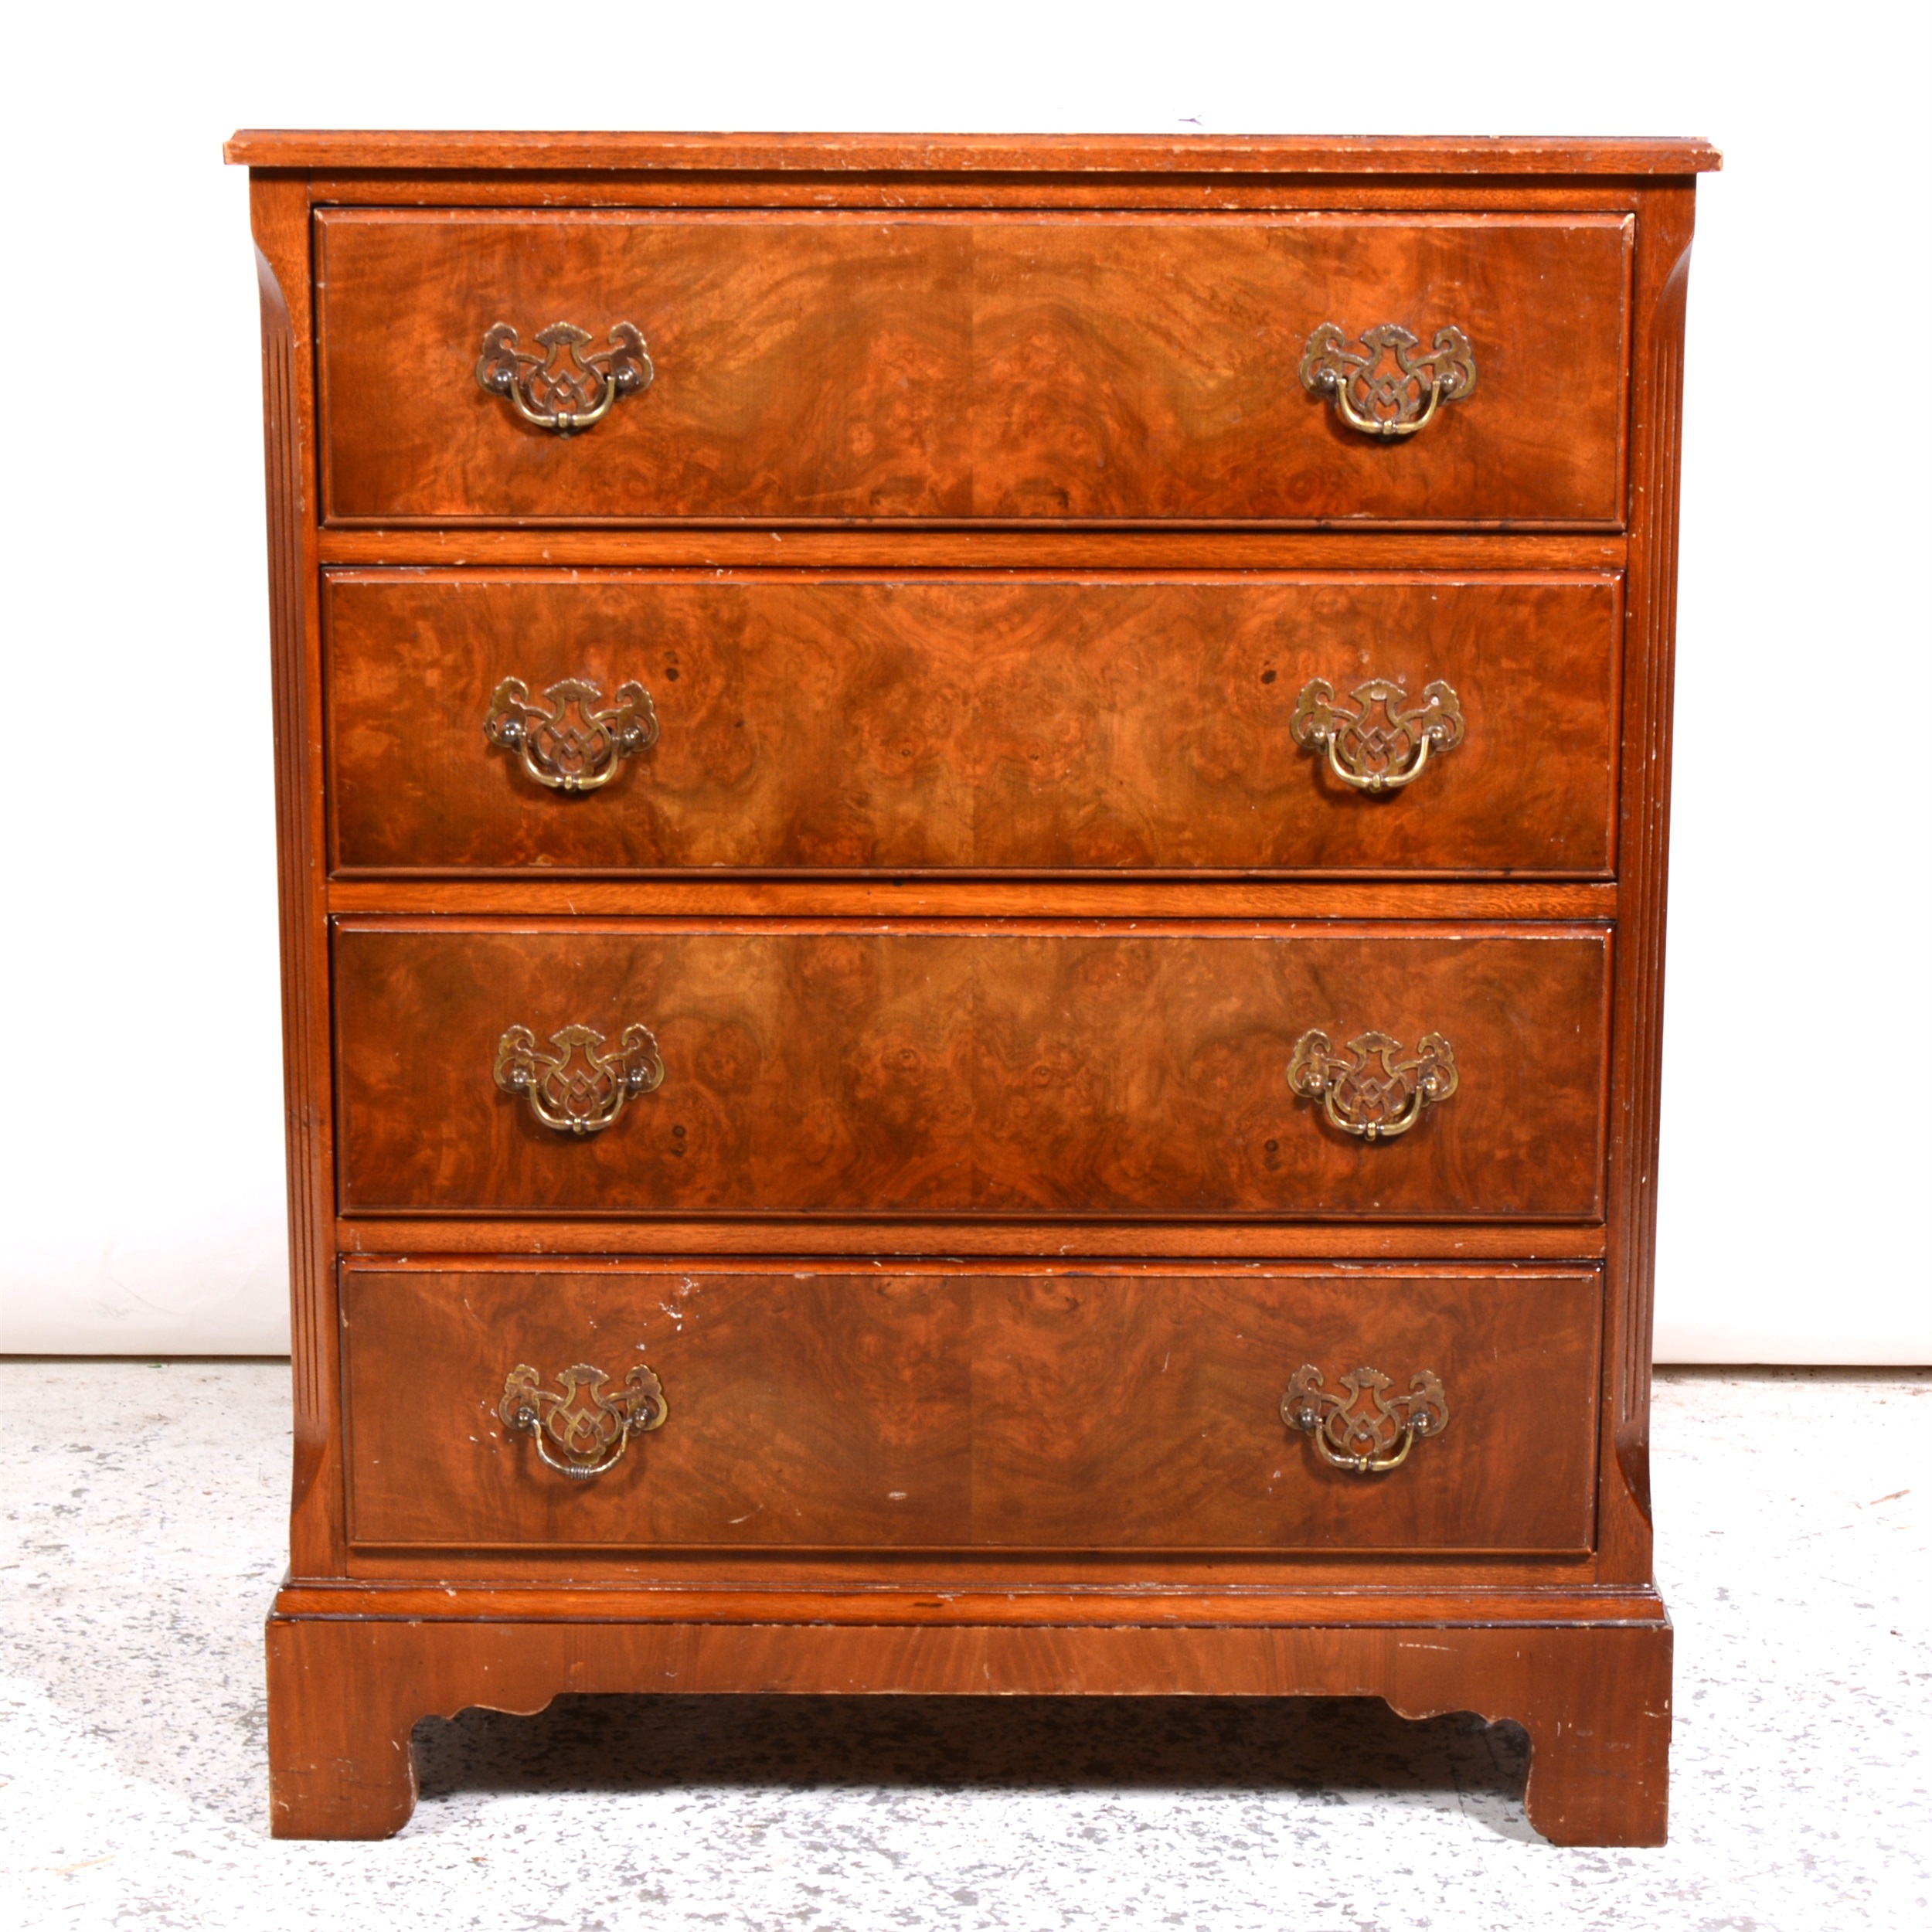 Reproduction walnut finish chest of drawers, etc